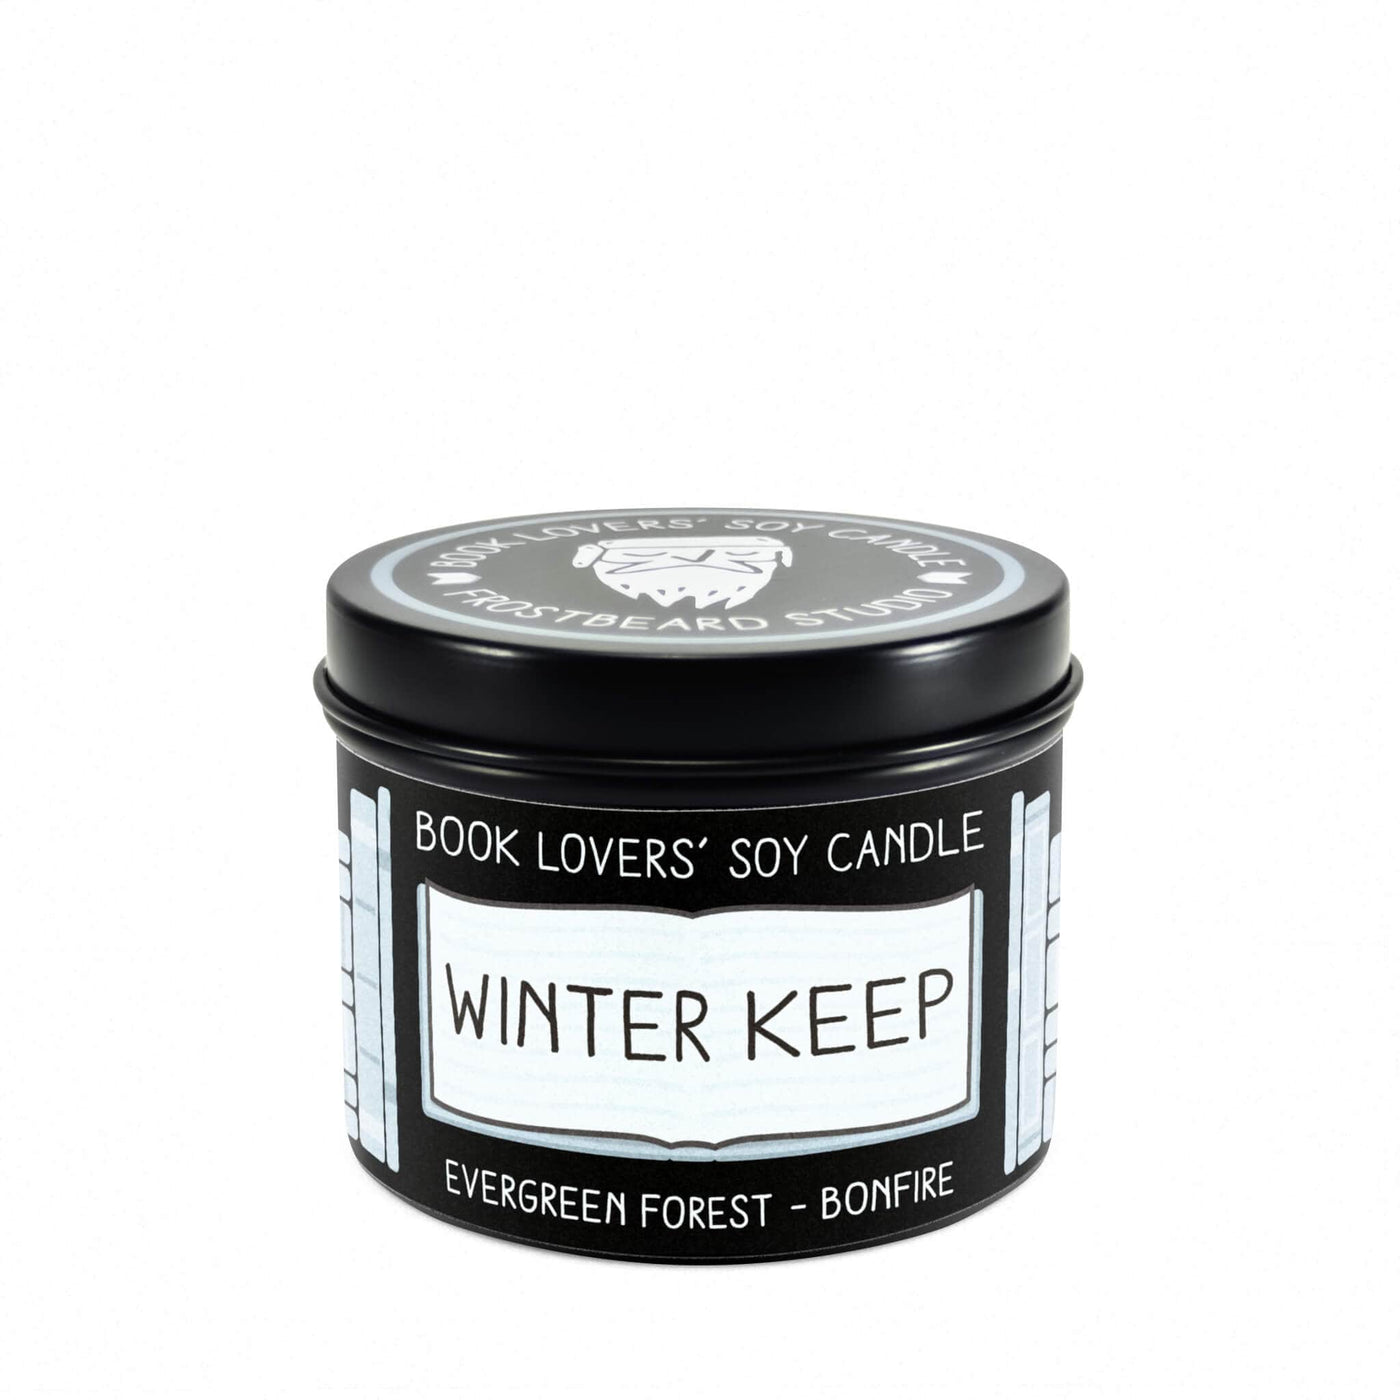 Winter Keep - 4 oz Tin - Book Lovers' Soy Candle - Frostbeard Studio